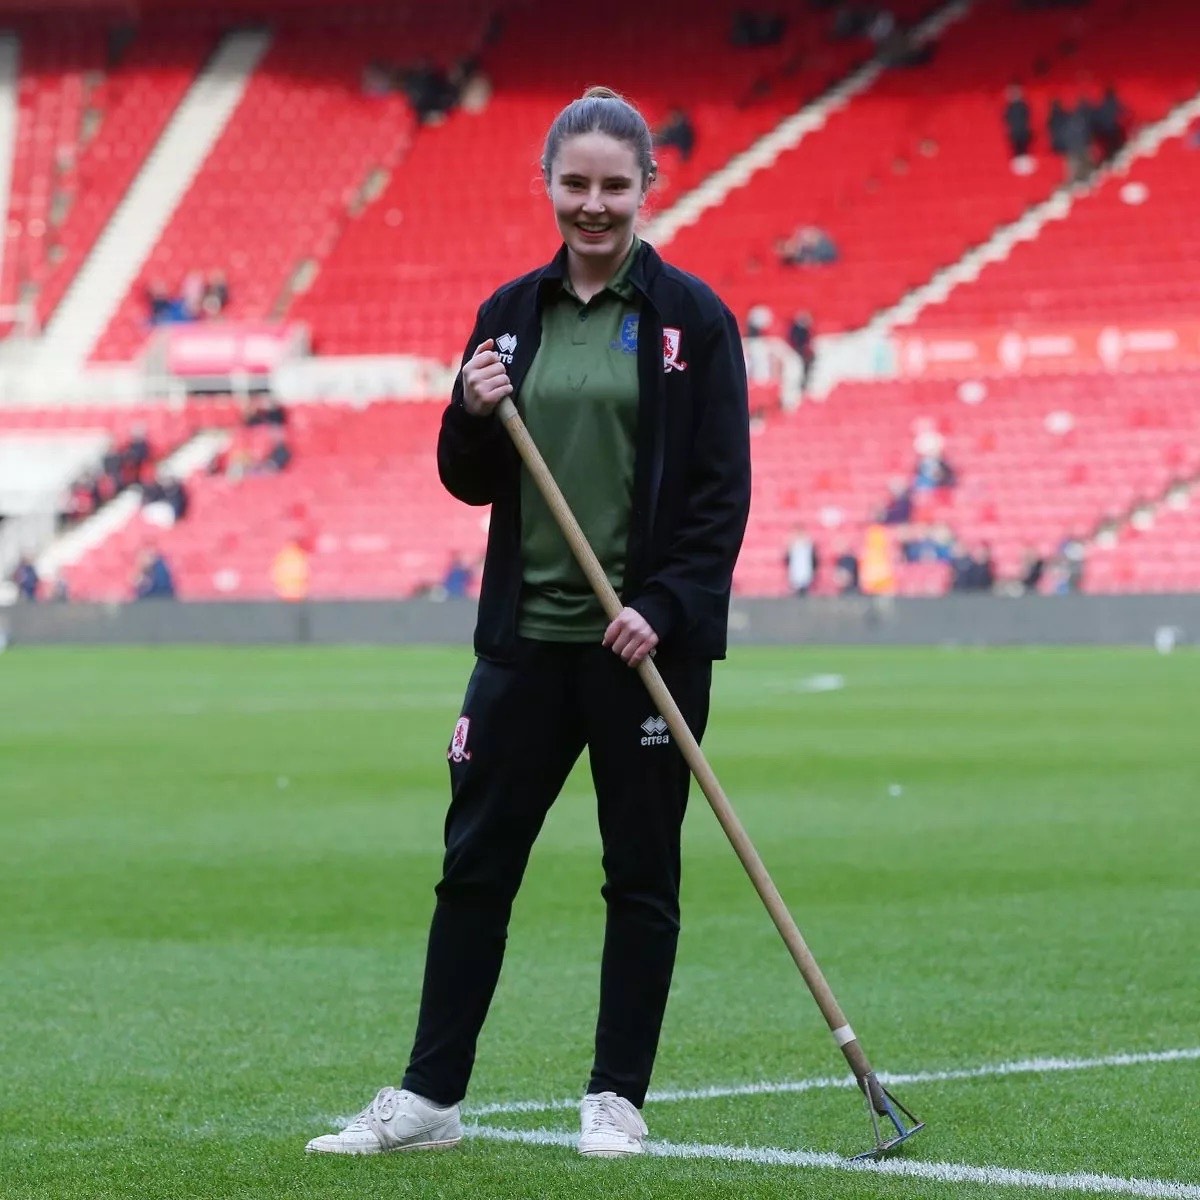 Meet @PhoebeTaylorson , a 19-year-old apprentice at Middlesbrough FC, driven by a passion for groundskeeping and breaking barriers in a male-dominated industry. Discover her journey, challenges, and inspiring insights for aspiring females in football allett.co.uk/blogs/blog/int…